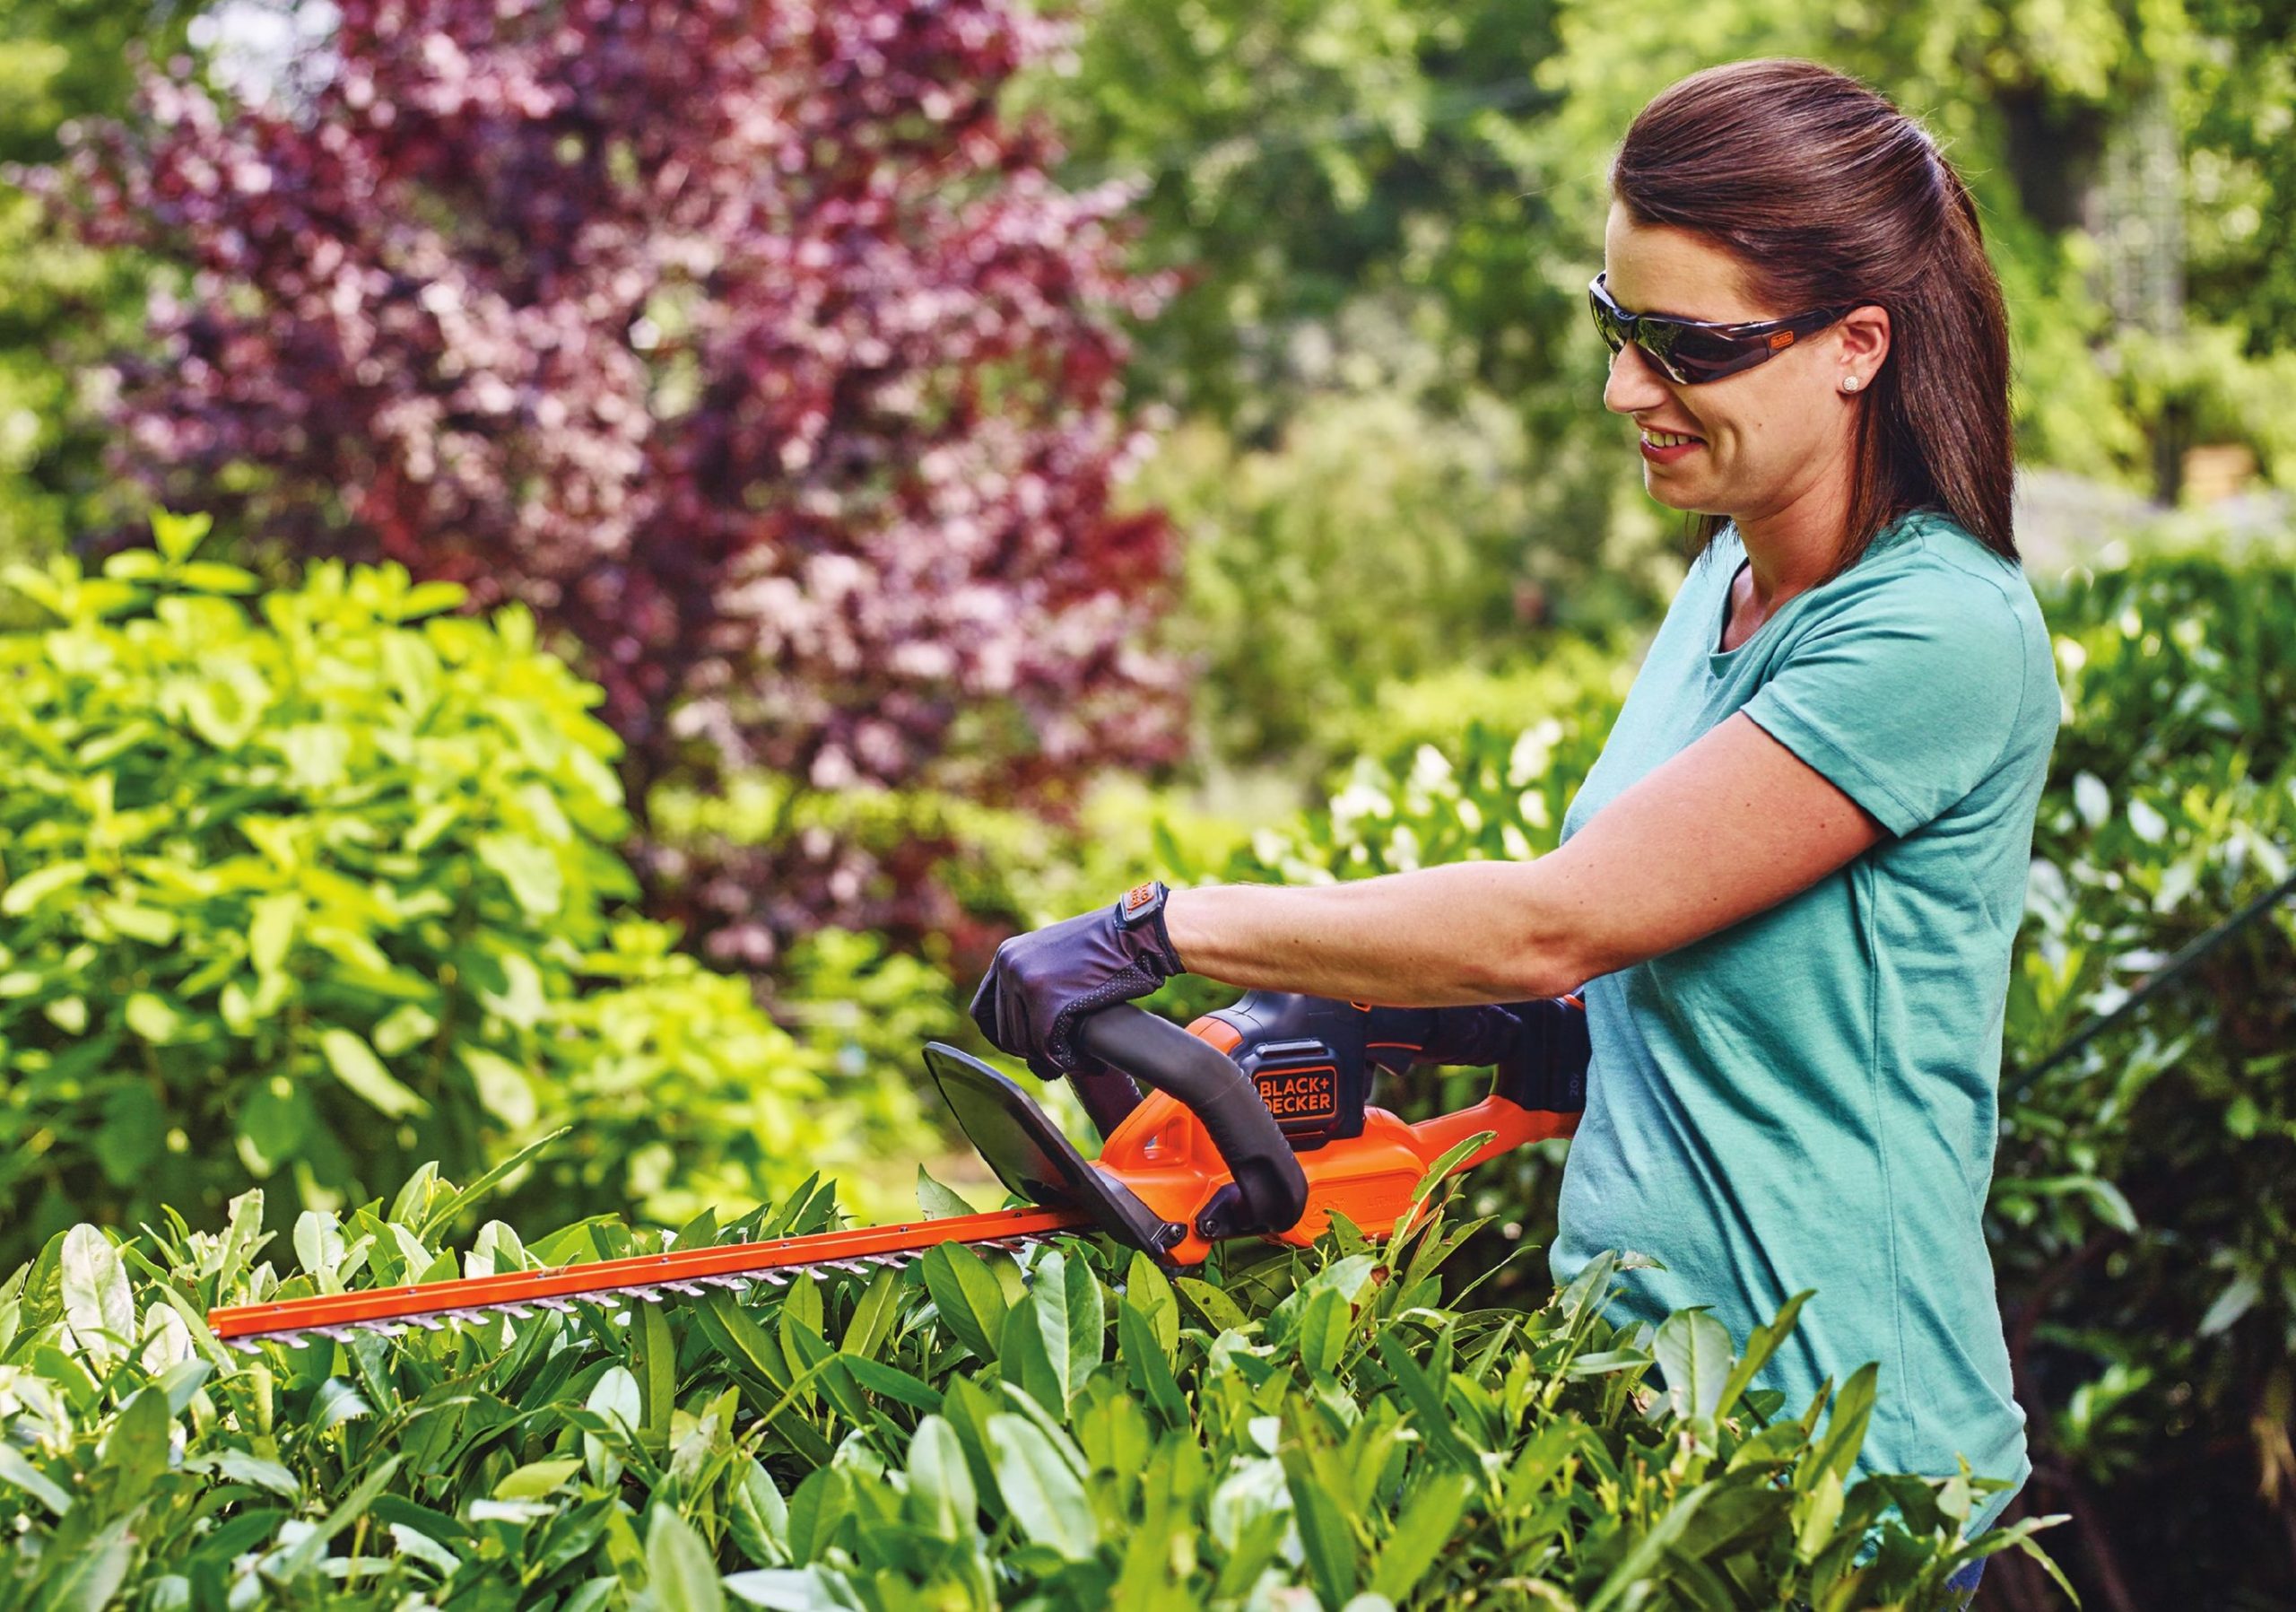 How to Trim Shrubs With Electric Trimmer